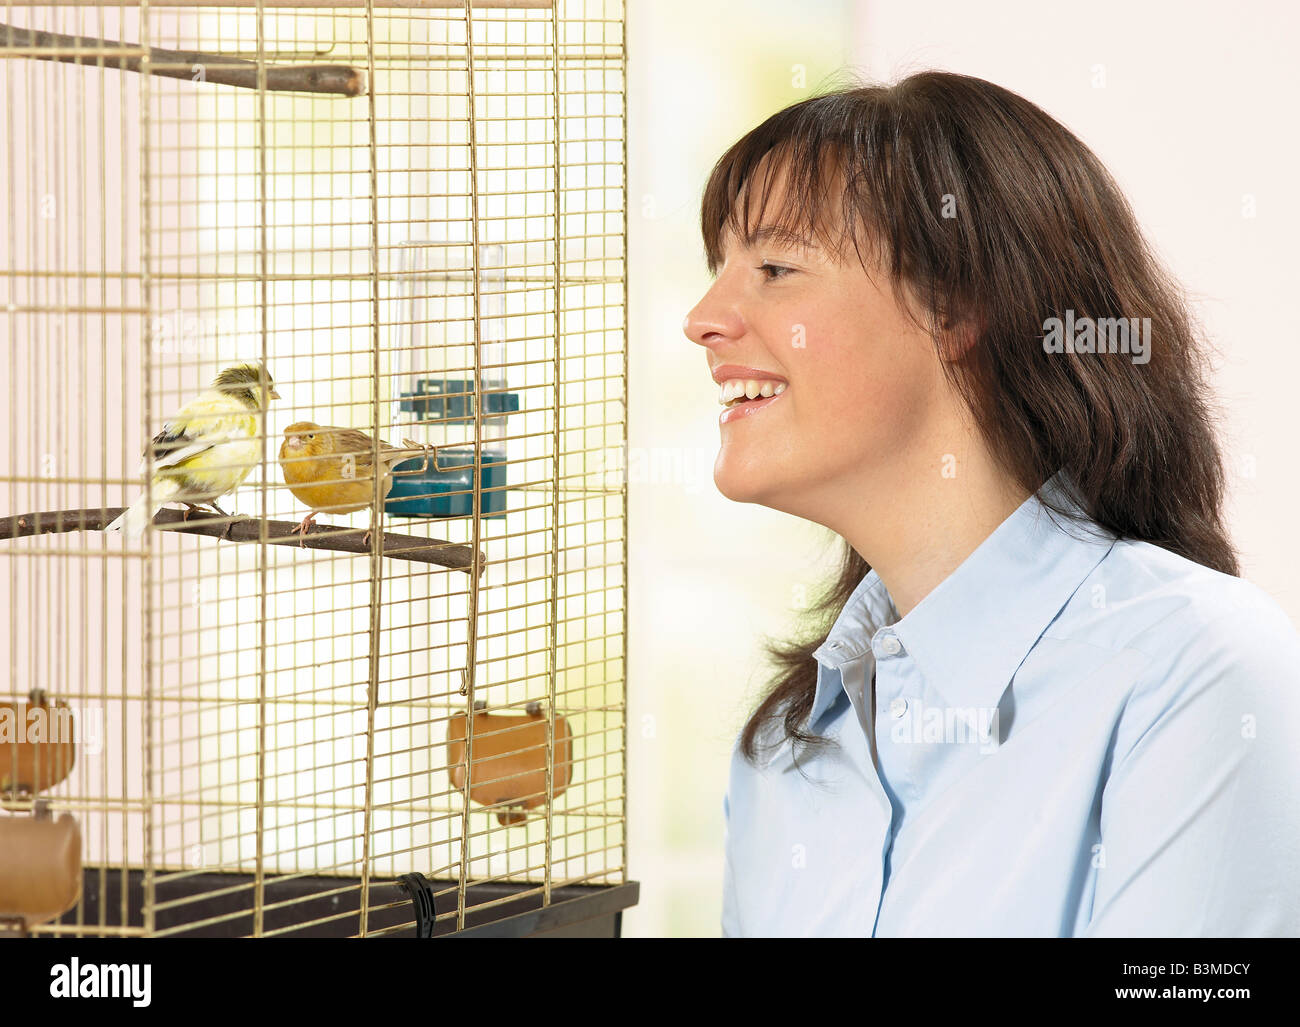 canaries and woman / Stock Photo